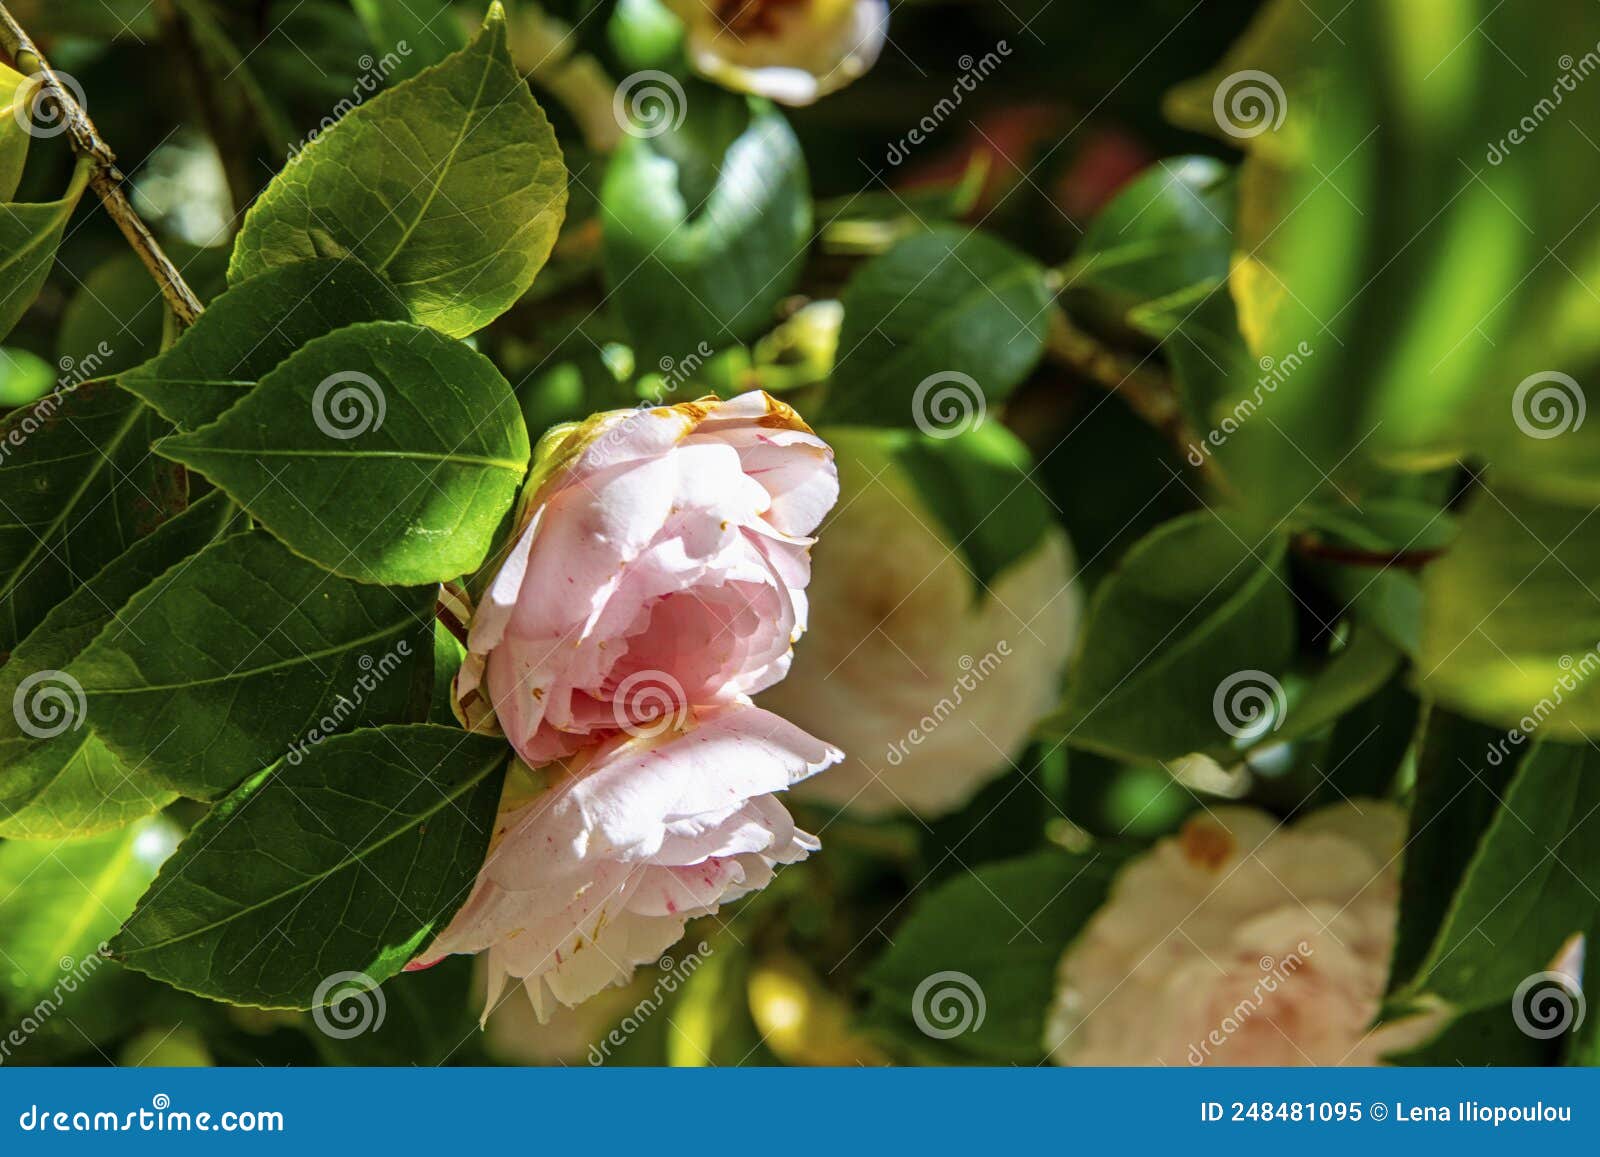 near view of rosa camelias in green atmosphere